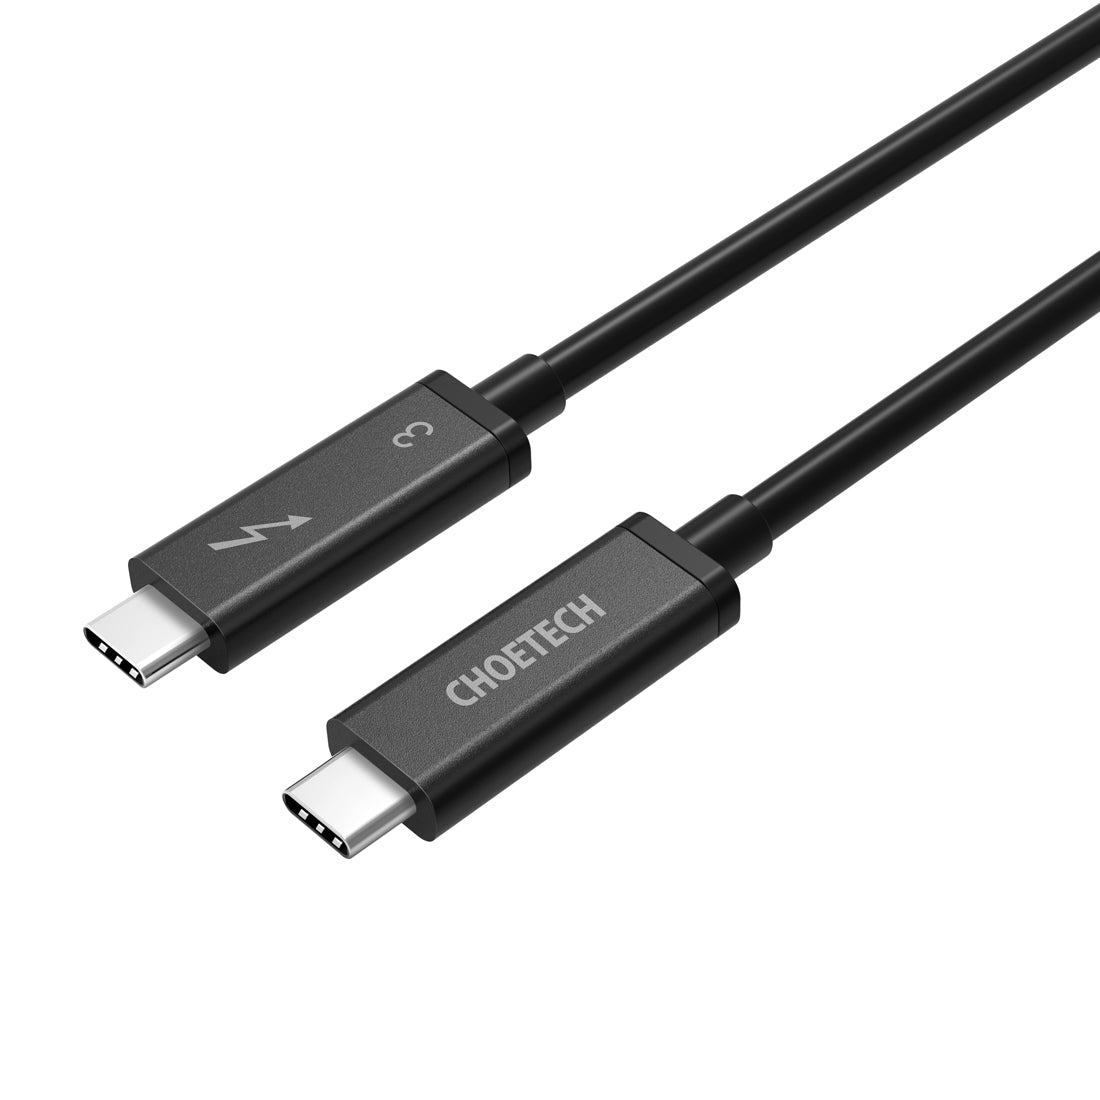 A3006 Choetech Thunderbolt 3 Cable (2M/6.5FT)–Active 40Gbps/100W Charging/5A,20V/Support 5K UHD Display